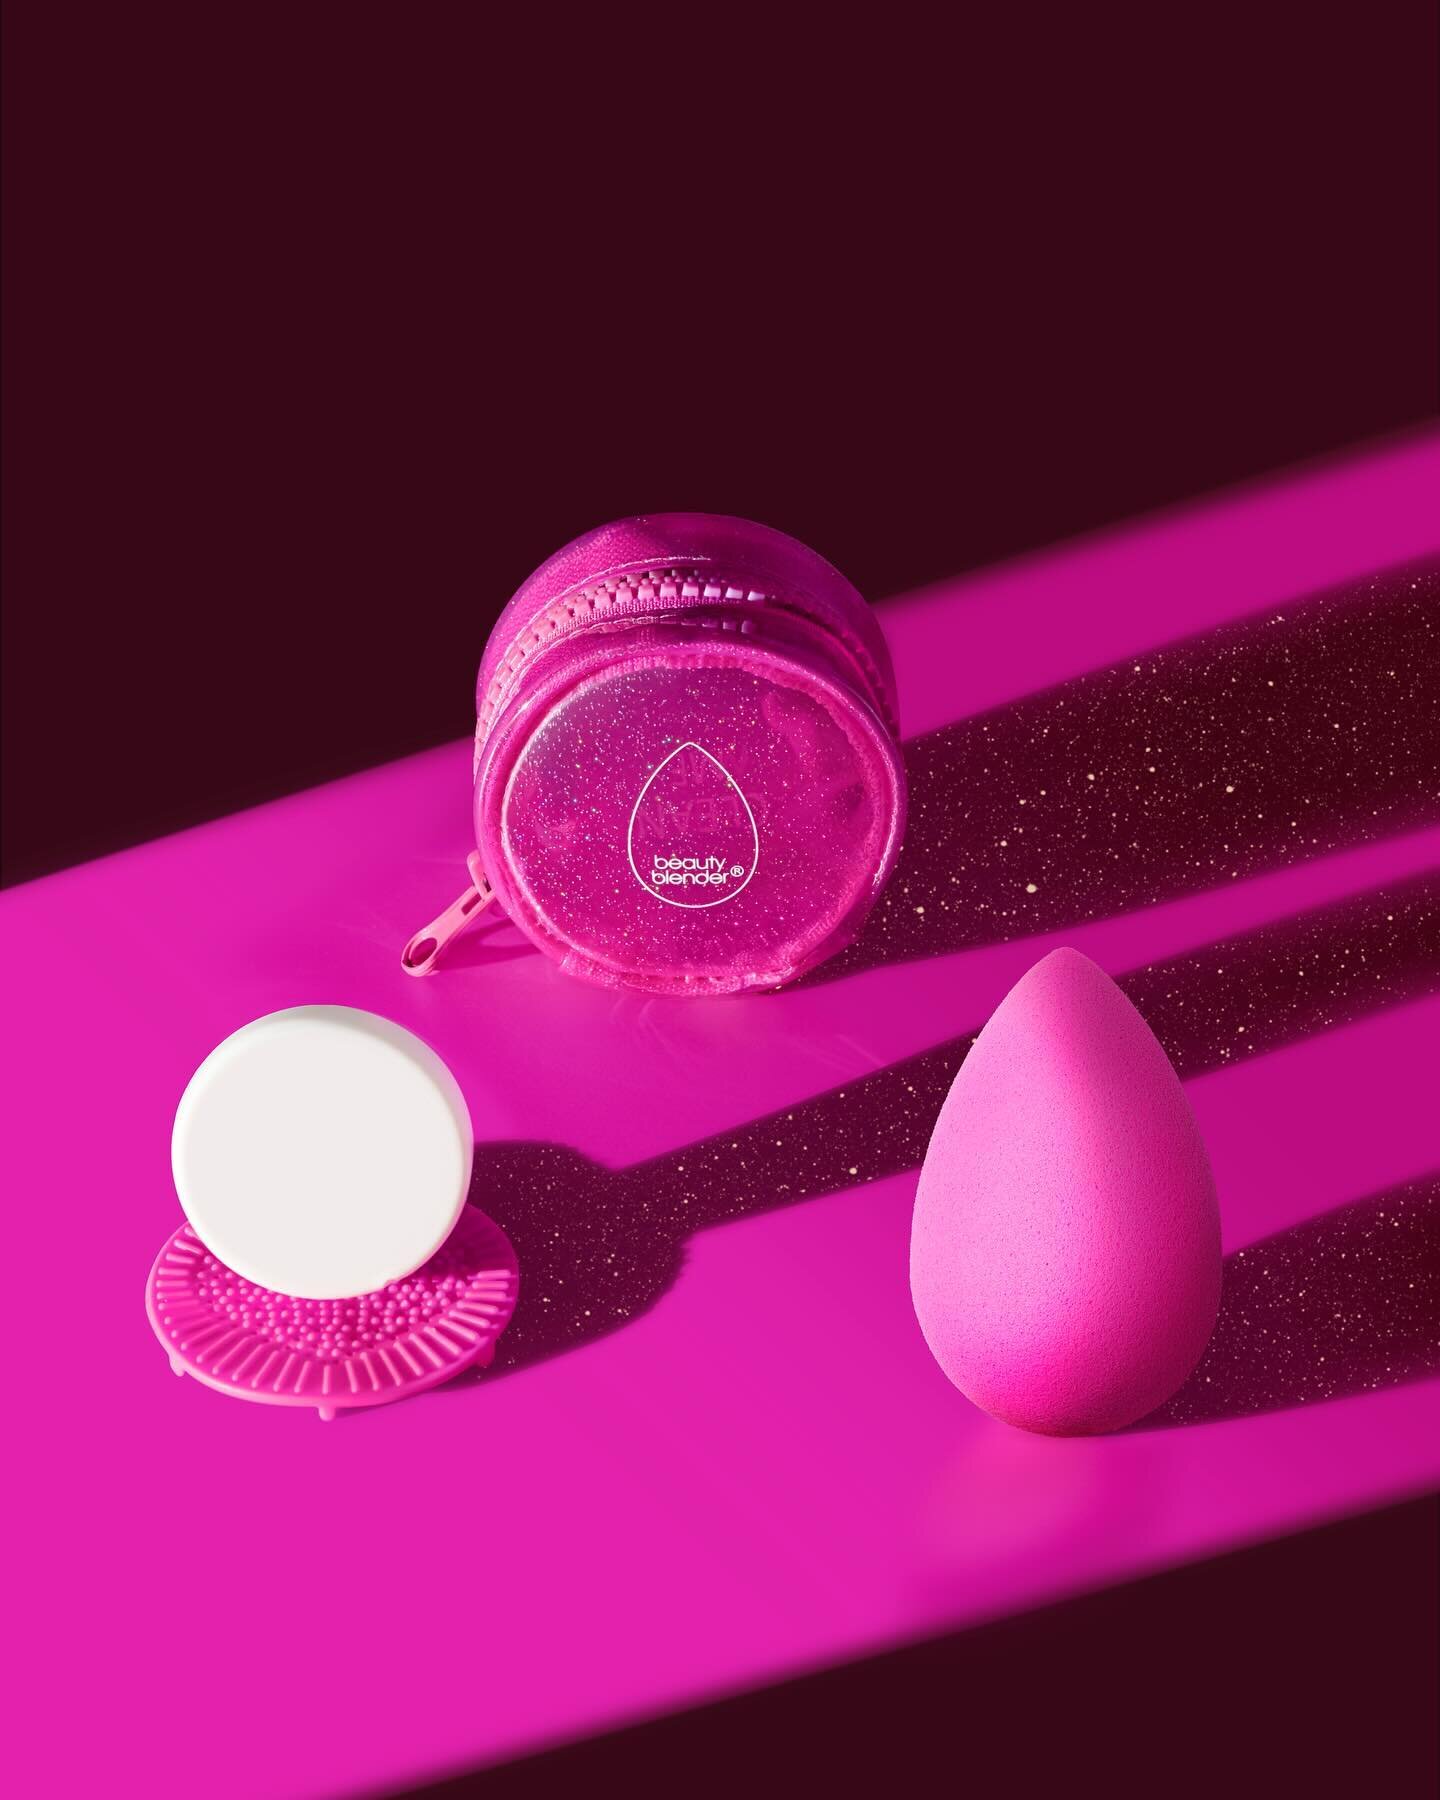 ✨ Get ready to slay your beauty game with our 4-piece starter set! ✨ Includes the iconic BEAUTYBLENDER&reg; ORIGINAL, vegan BLENDERCLEANSER&reg;, Silicone Mat, and Limited-Edition Glitter Pouch. Get flawless results every time! ✨ #beautyessentials #f